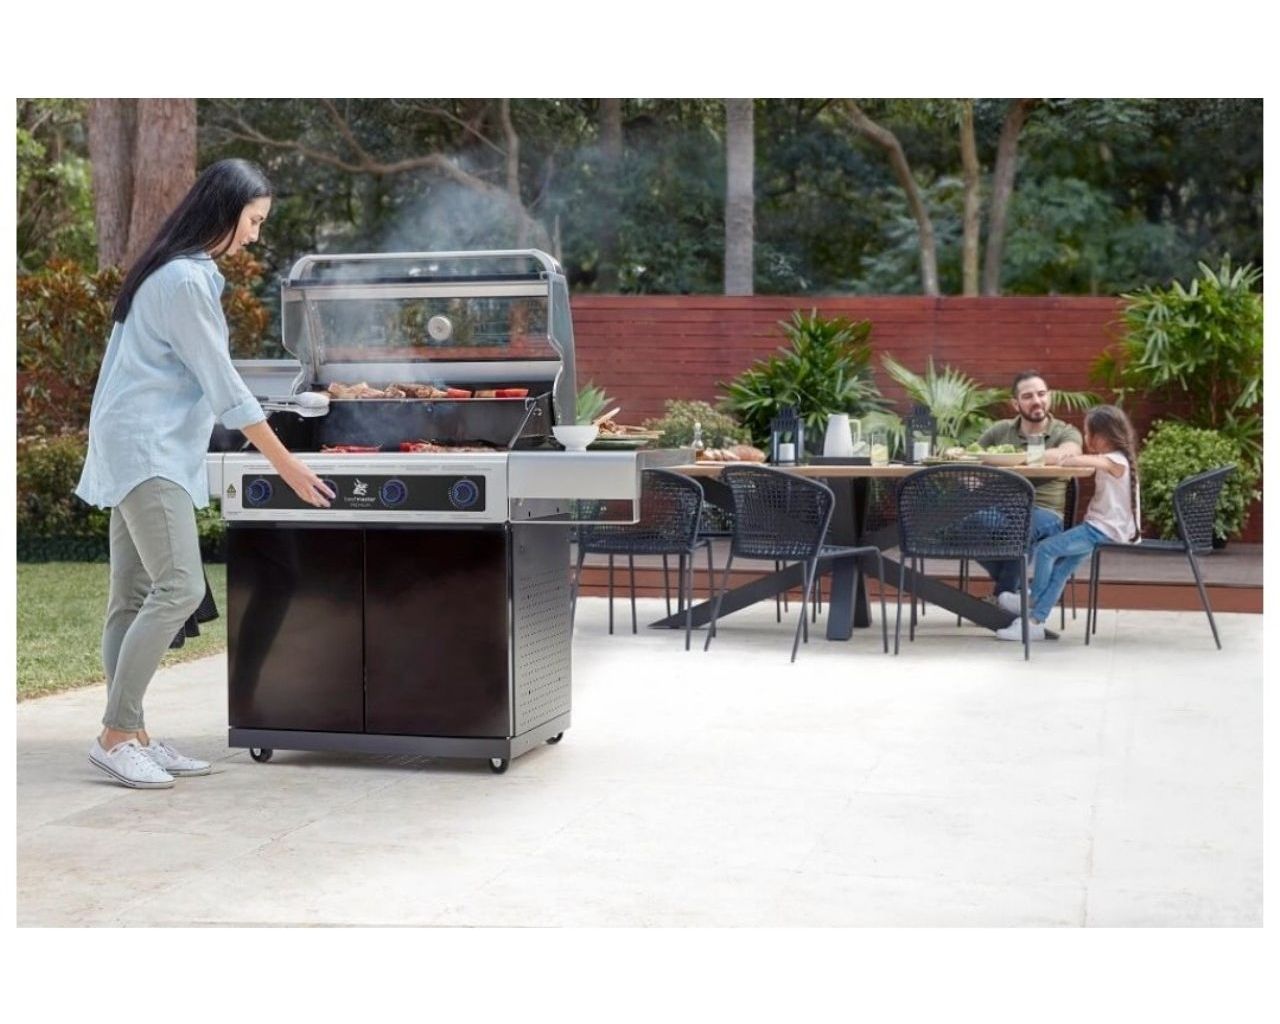 Premium Beefmaster 4 Burner BBQ on Deluxe Cart with Folding Shelves, , hi-res image number null